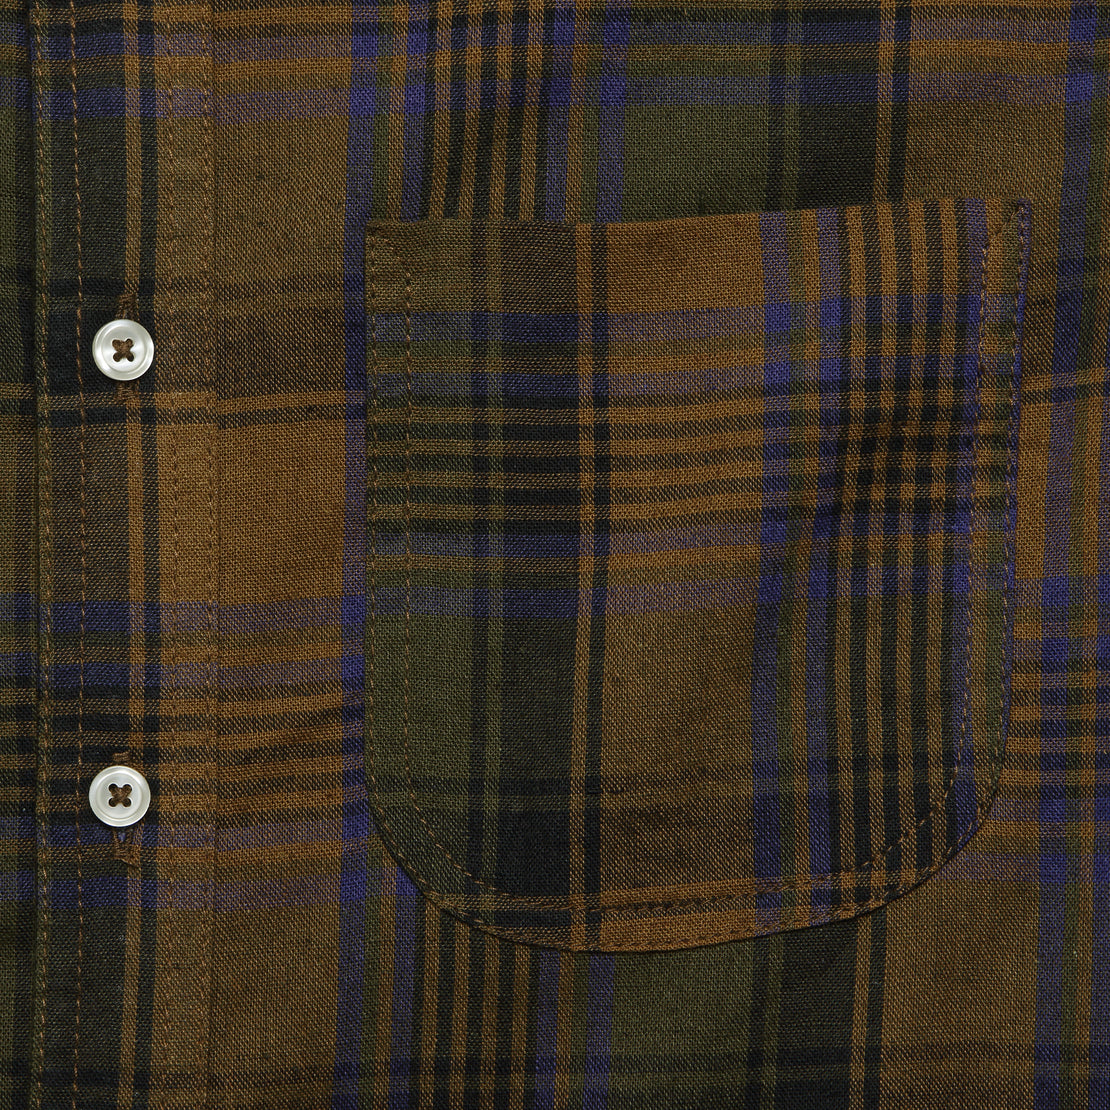 Jumper Plaid Shirt - Brown - Rogue Territory - STAG Provisions - Tops - L/S Woven - Plaid